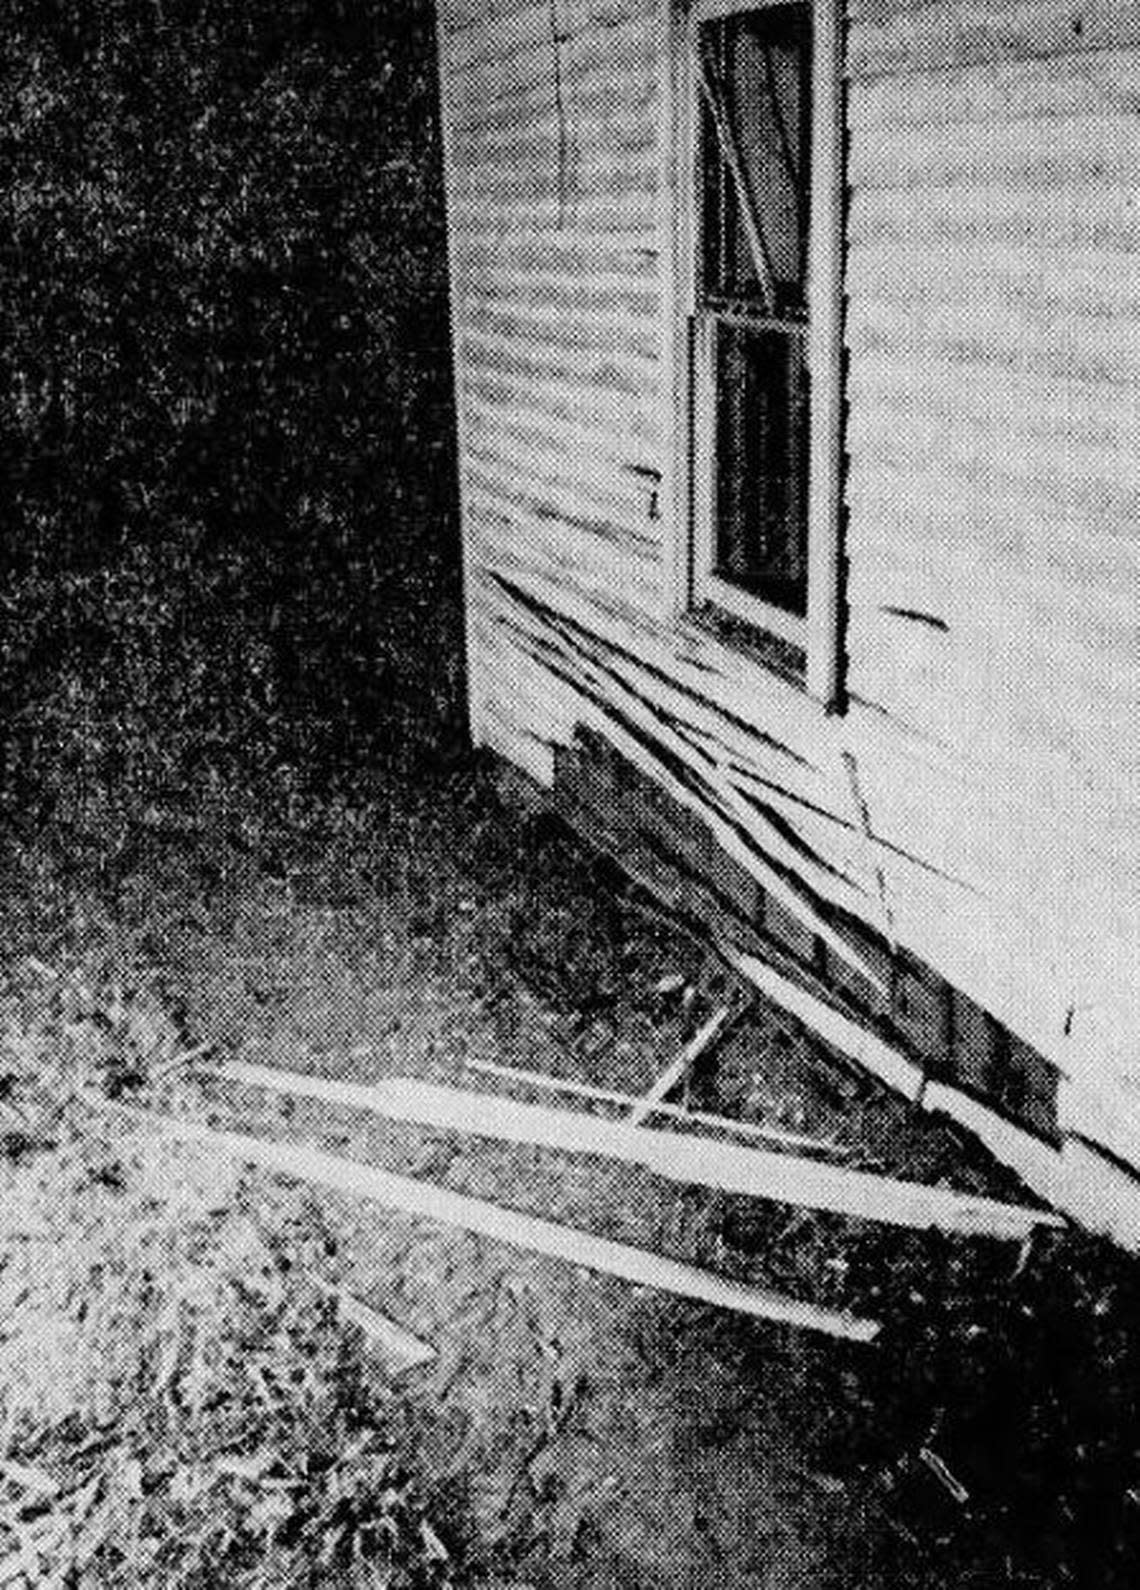 Someone tossed dynamite at the Pike County home of Alan and Margaret McSurely in 1968, badly damaging it.